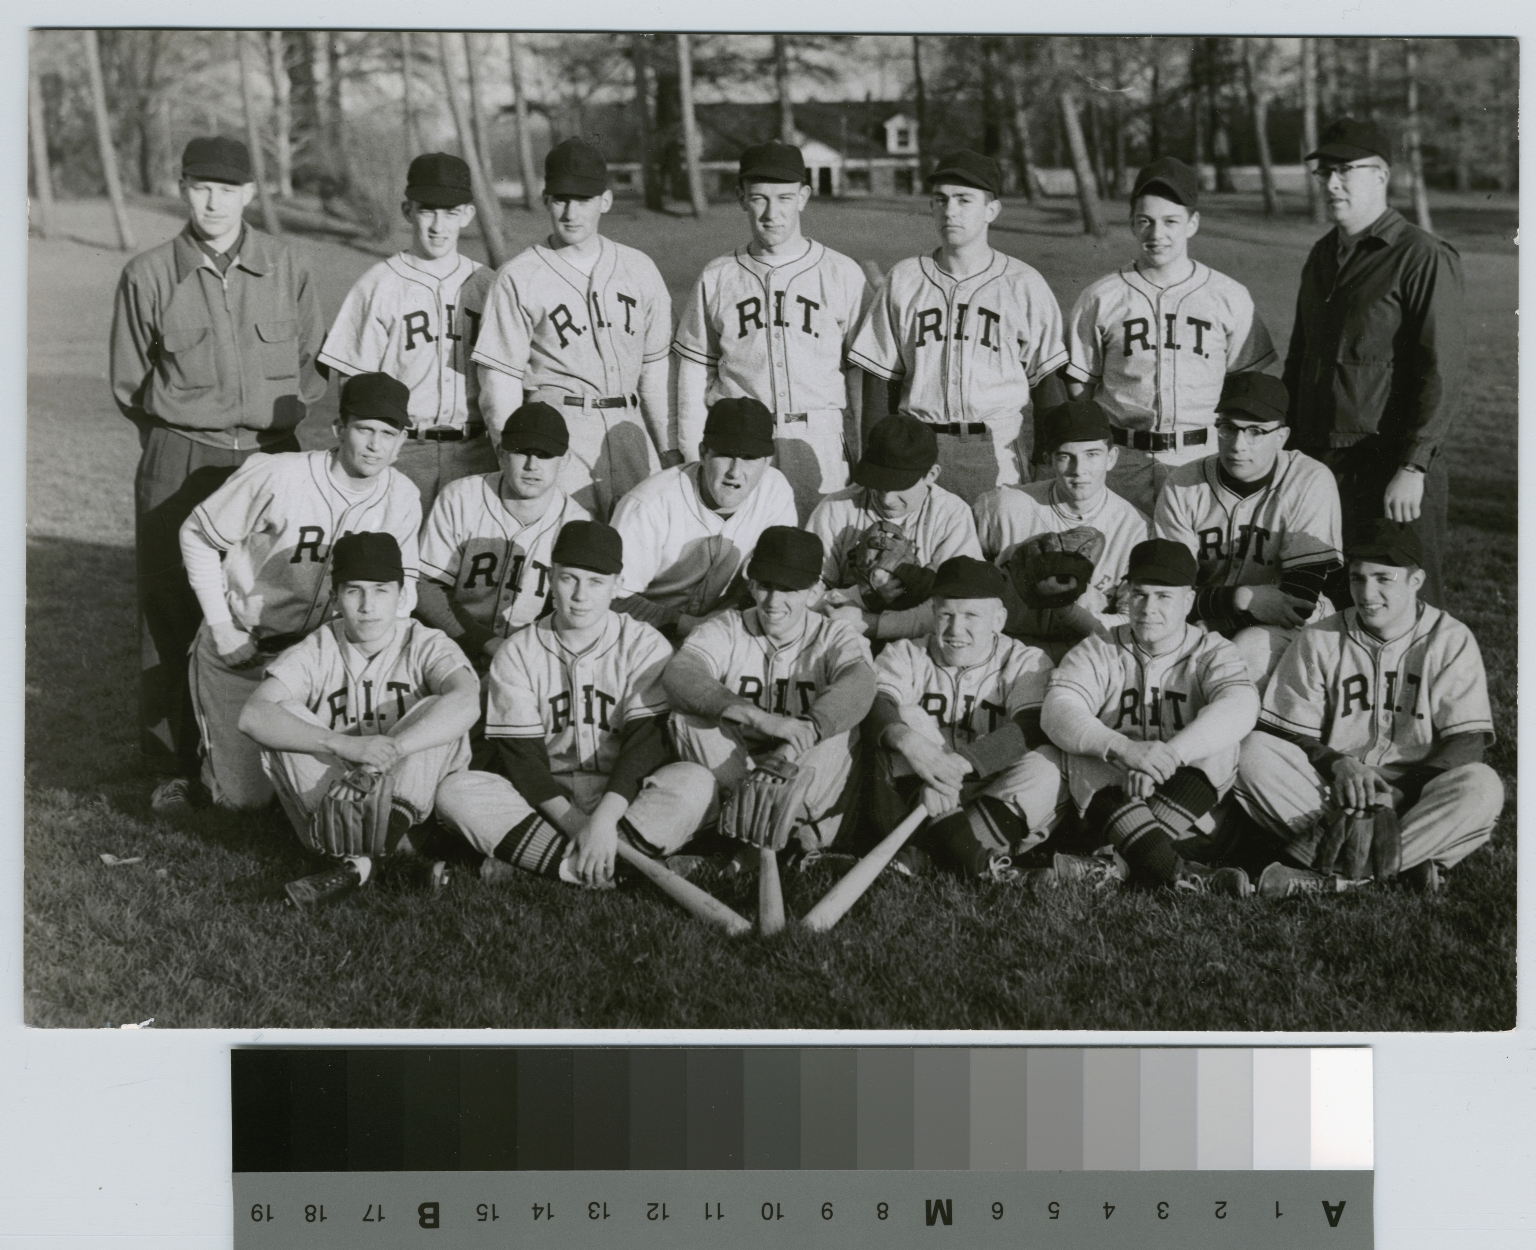 Student activities, Sports, group portrait of the Rochester Institute of Technology baseball team and coaches [1945-1960] [picture].